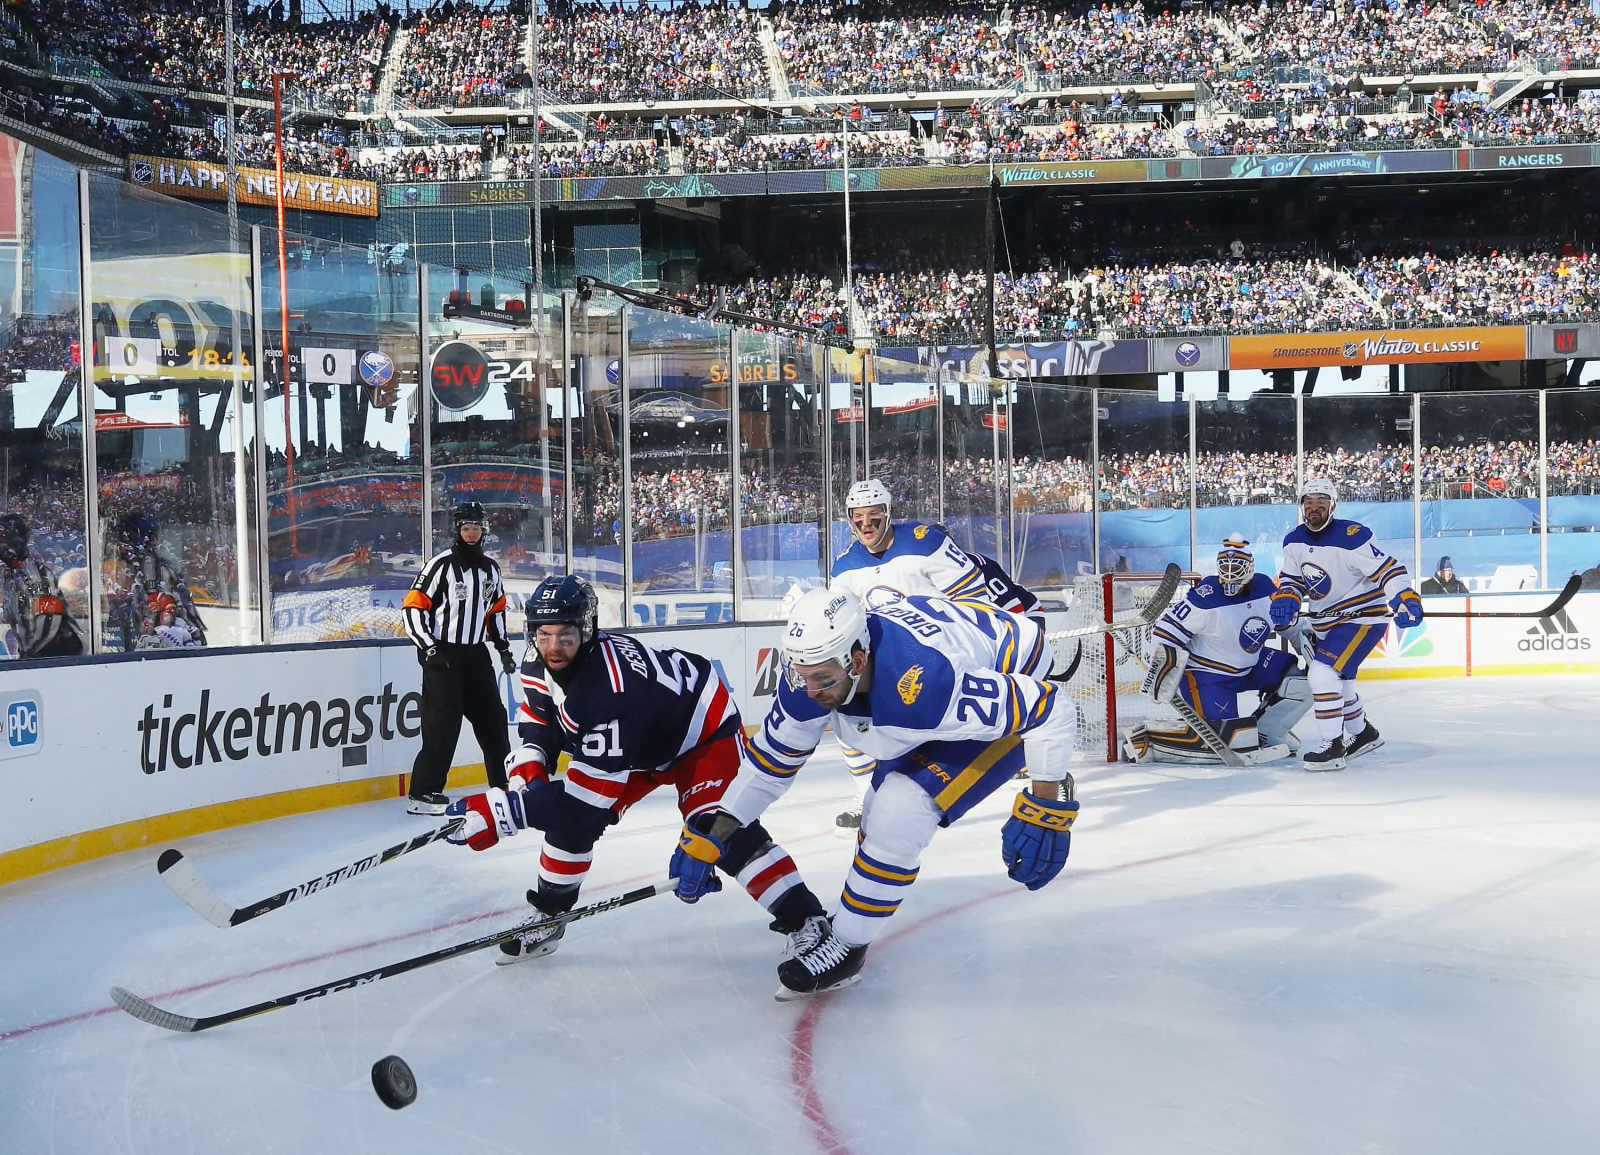 2018 Winter Classic: The best outdoor photos of the Sabres vs